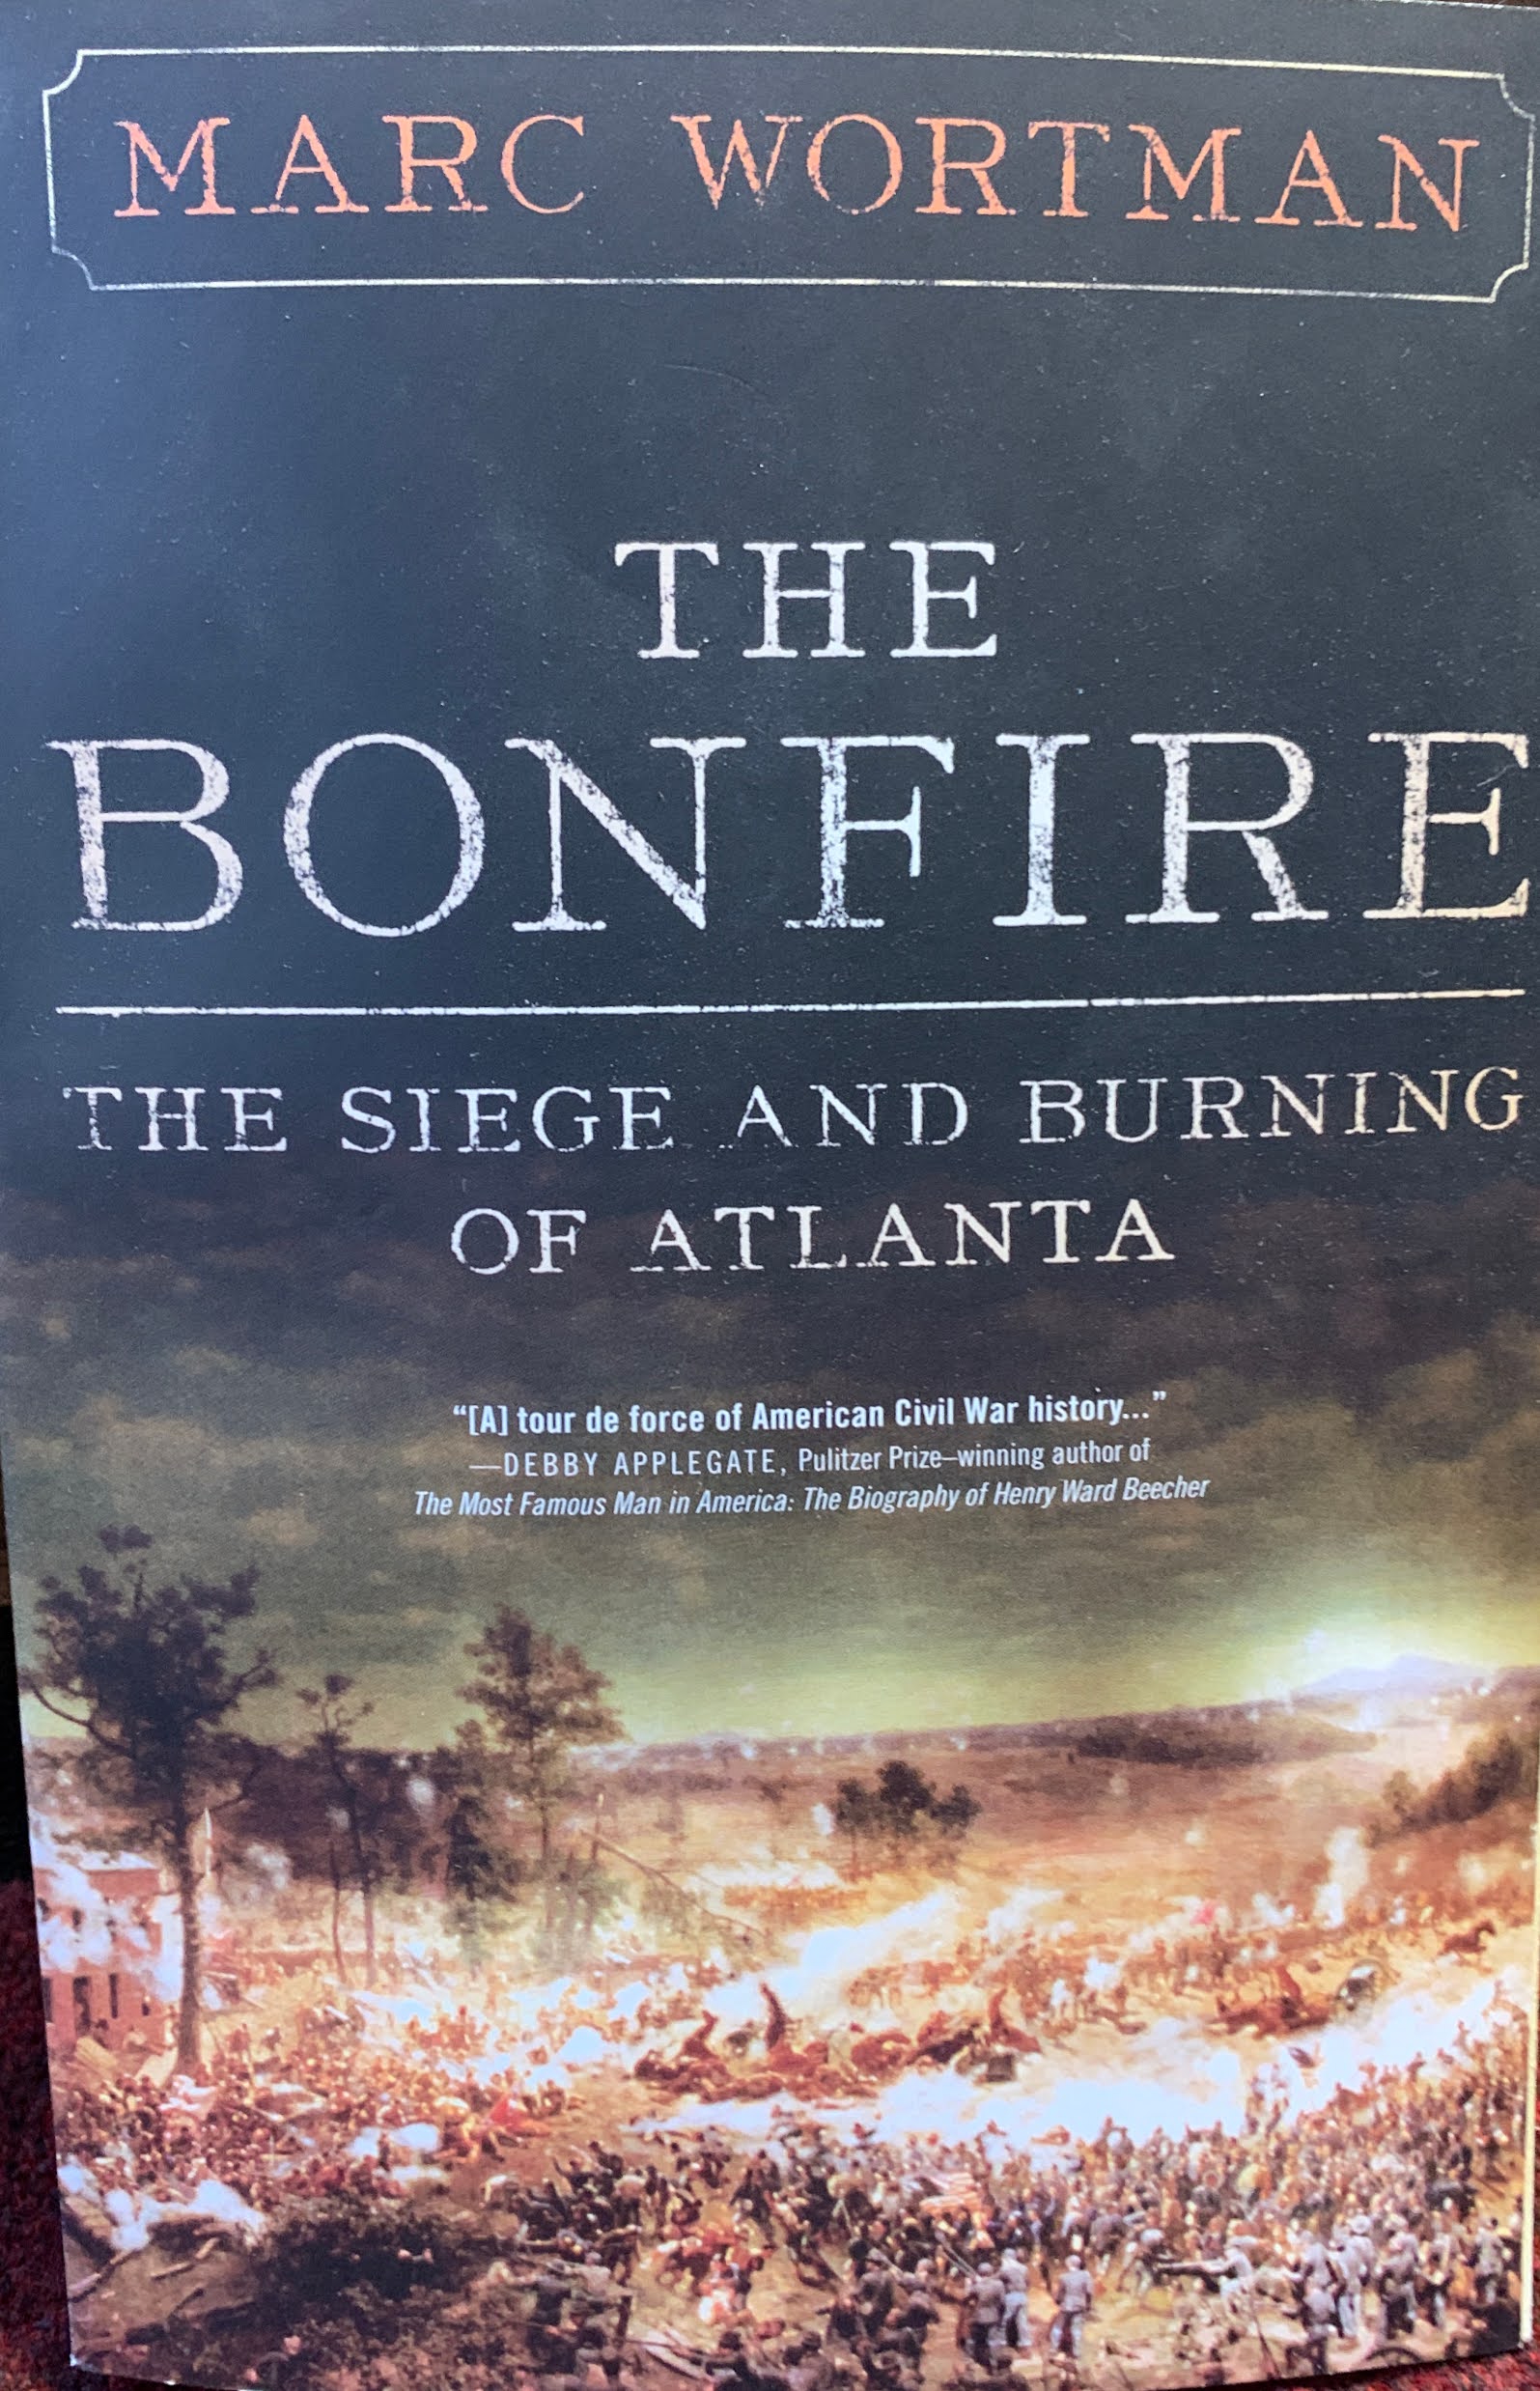 The Bonfire - The Siege and Burning of Atlanta